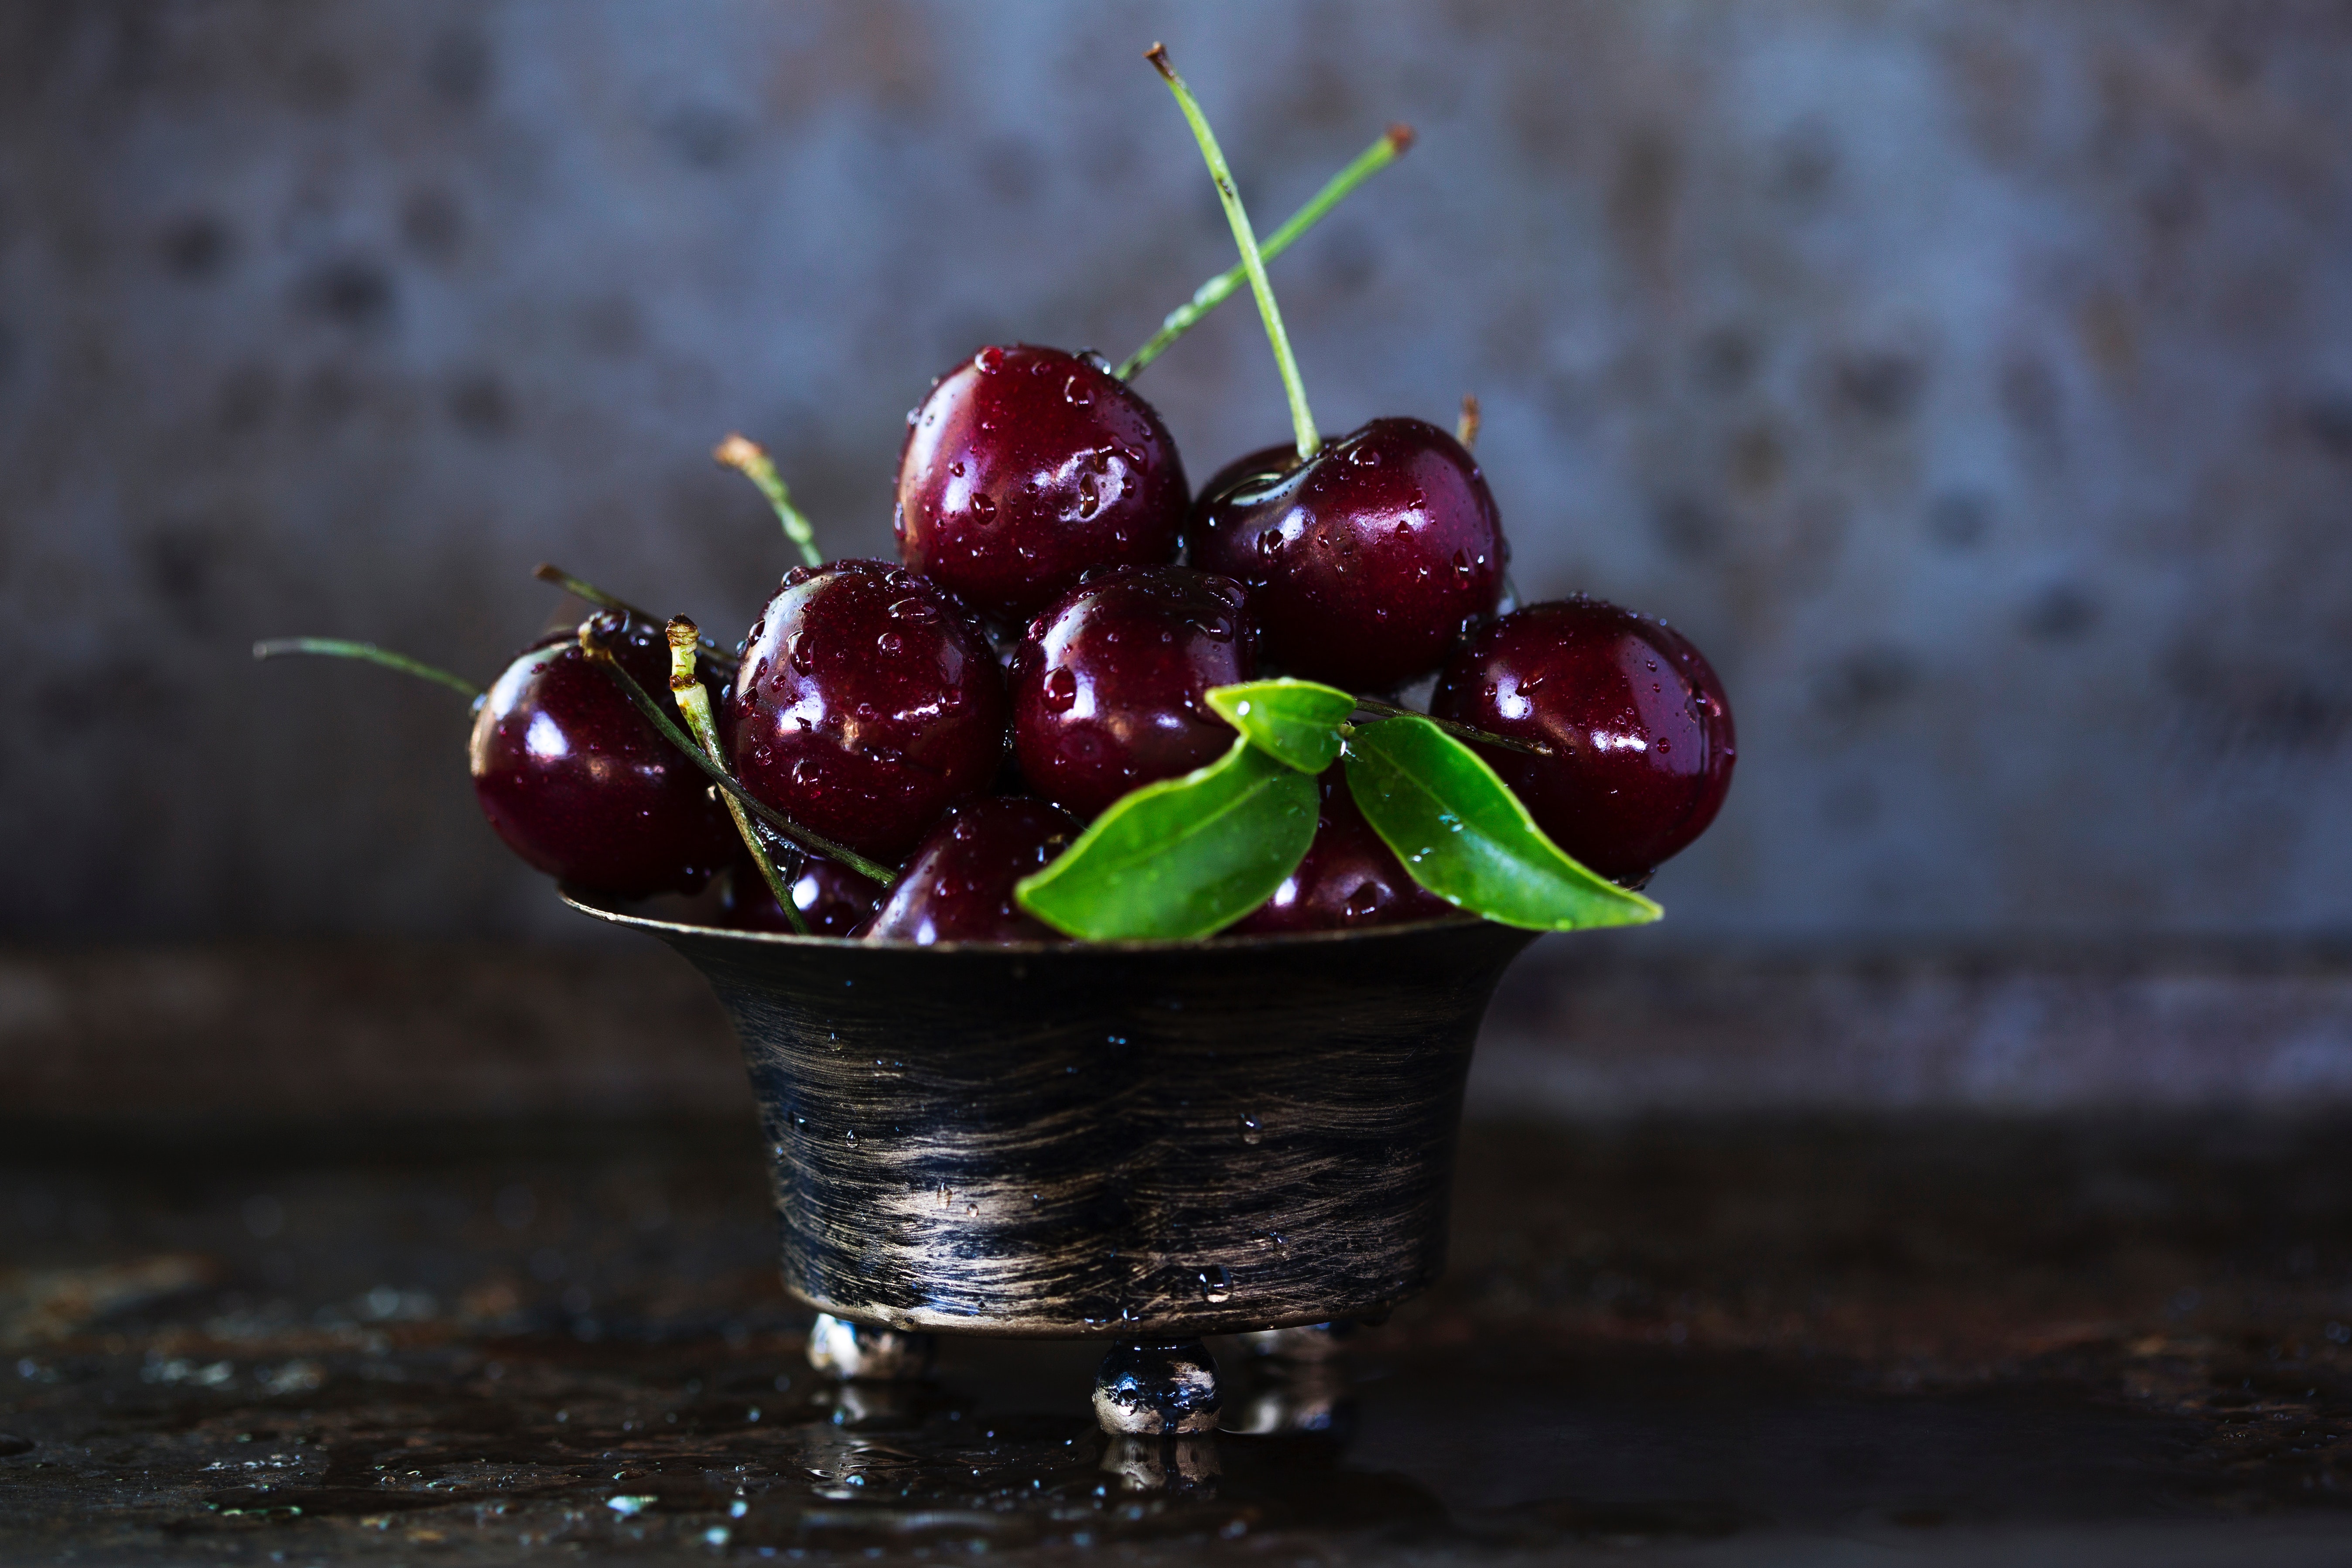 122229 download wallpaper berries, sweet cherry, food, cherry, drops, bowl, ripe screensavers and pictures for free